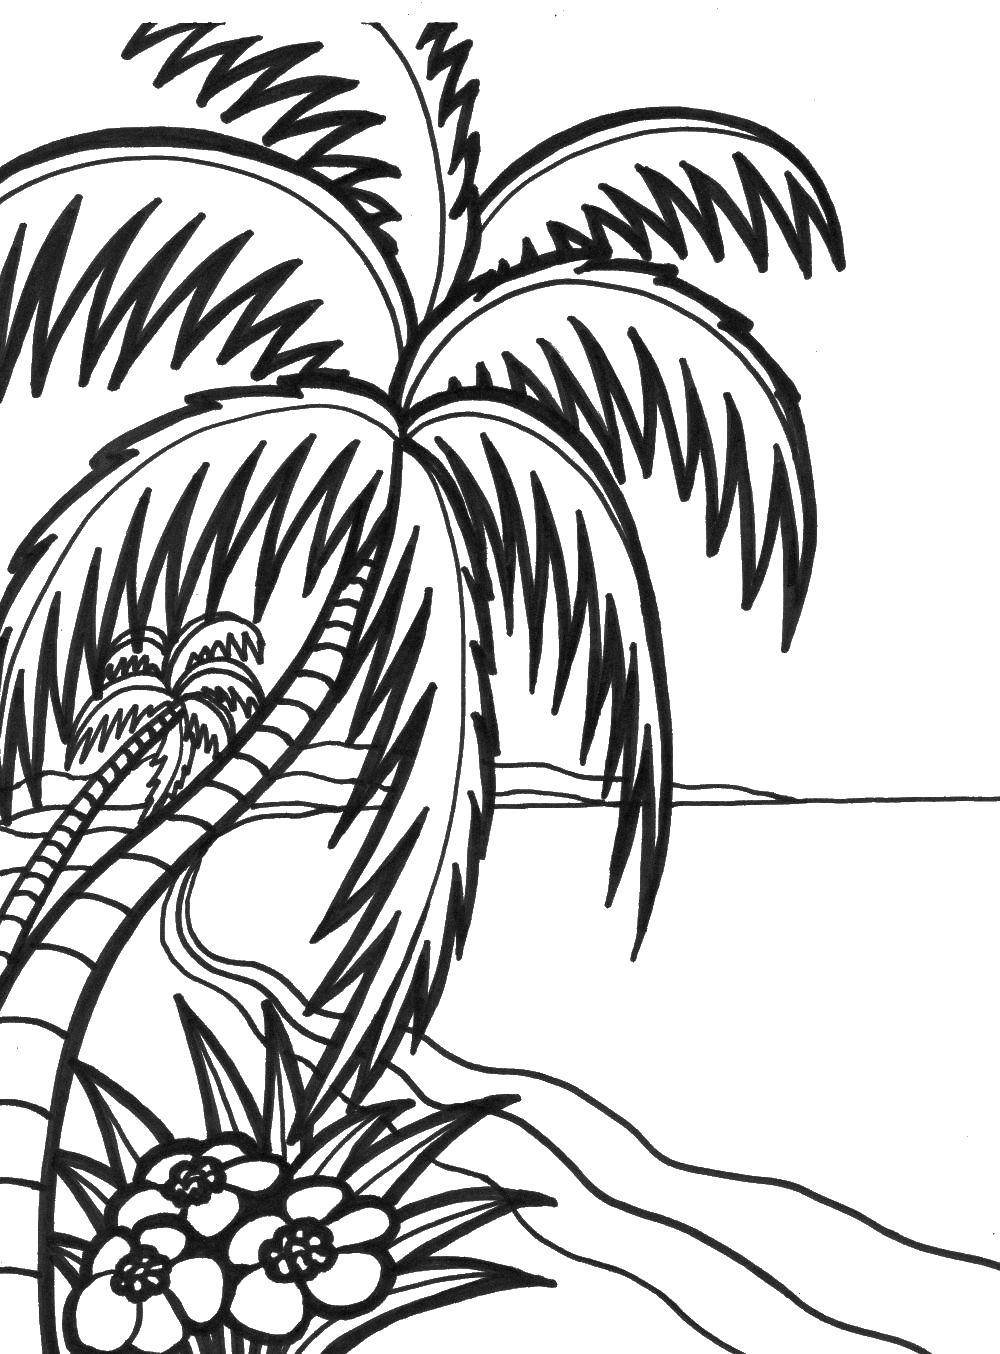 Coloring The palm tree on the beach. Category Summer beach. Tags:  beach, summer, palm tree.